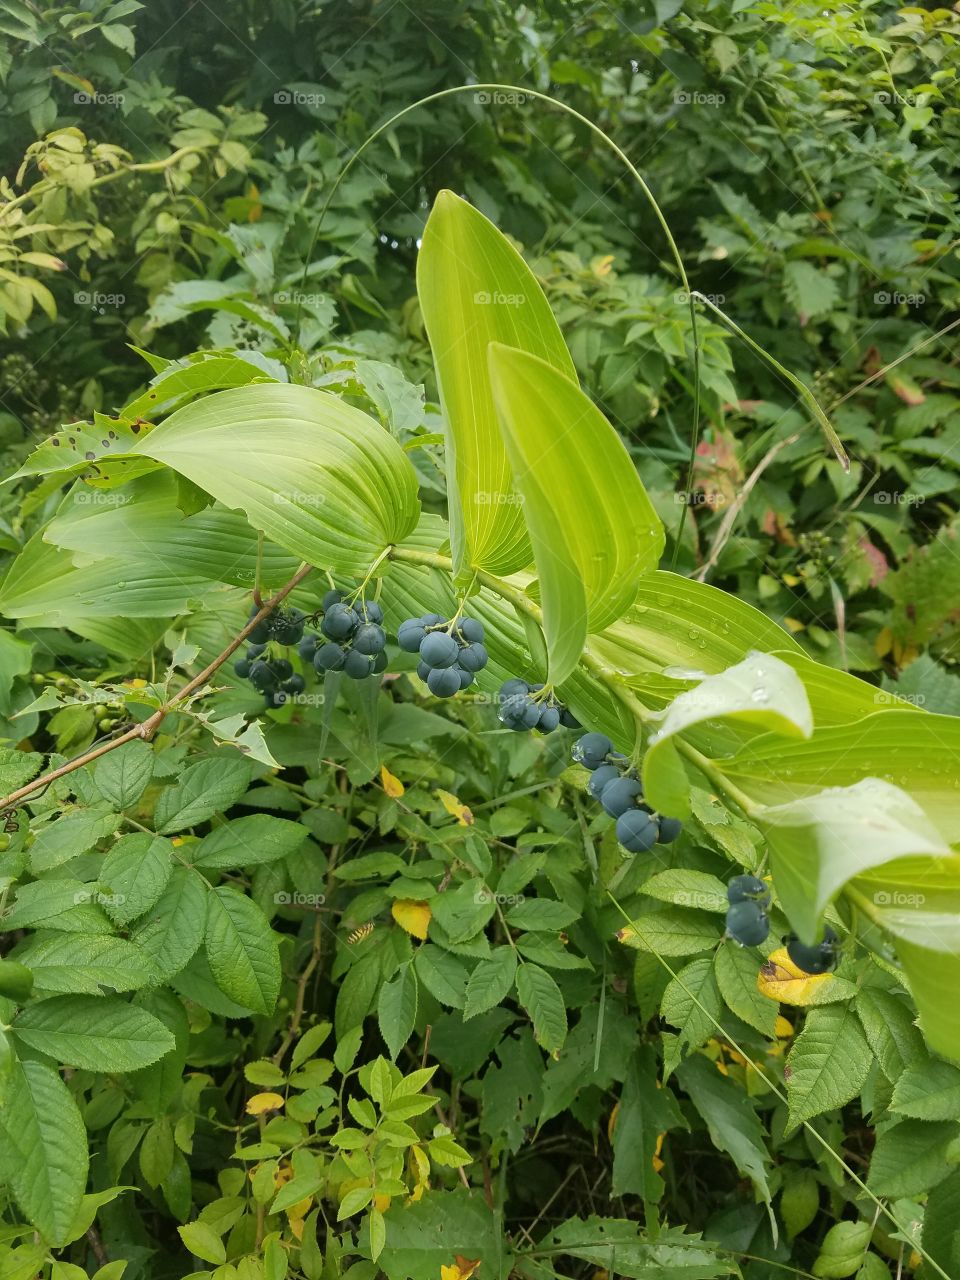 Berries on the Trail